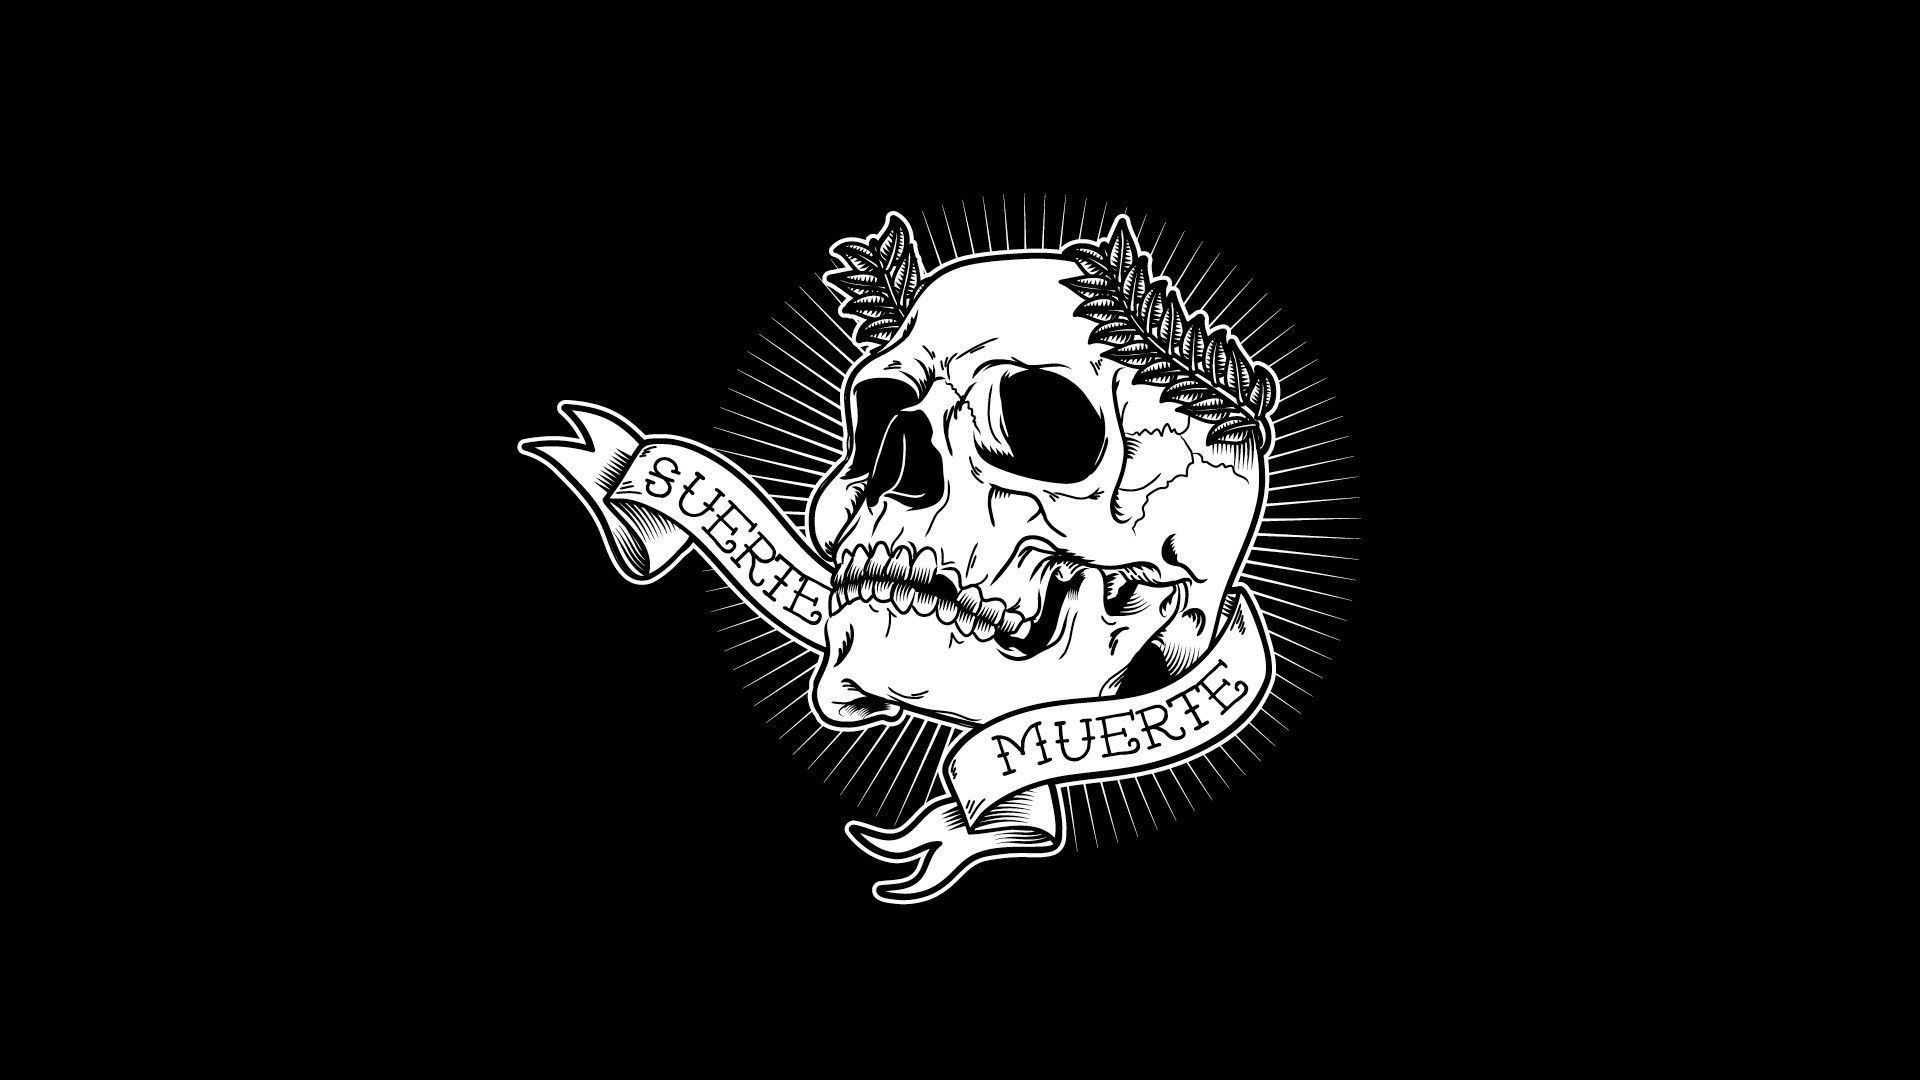 Skull with a banner that says muerte - Skeleton